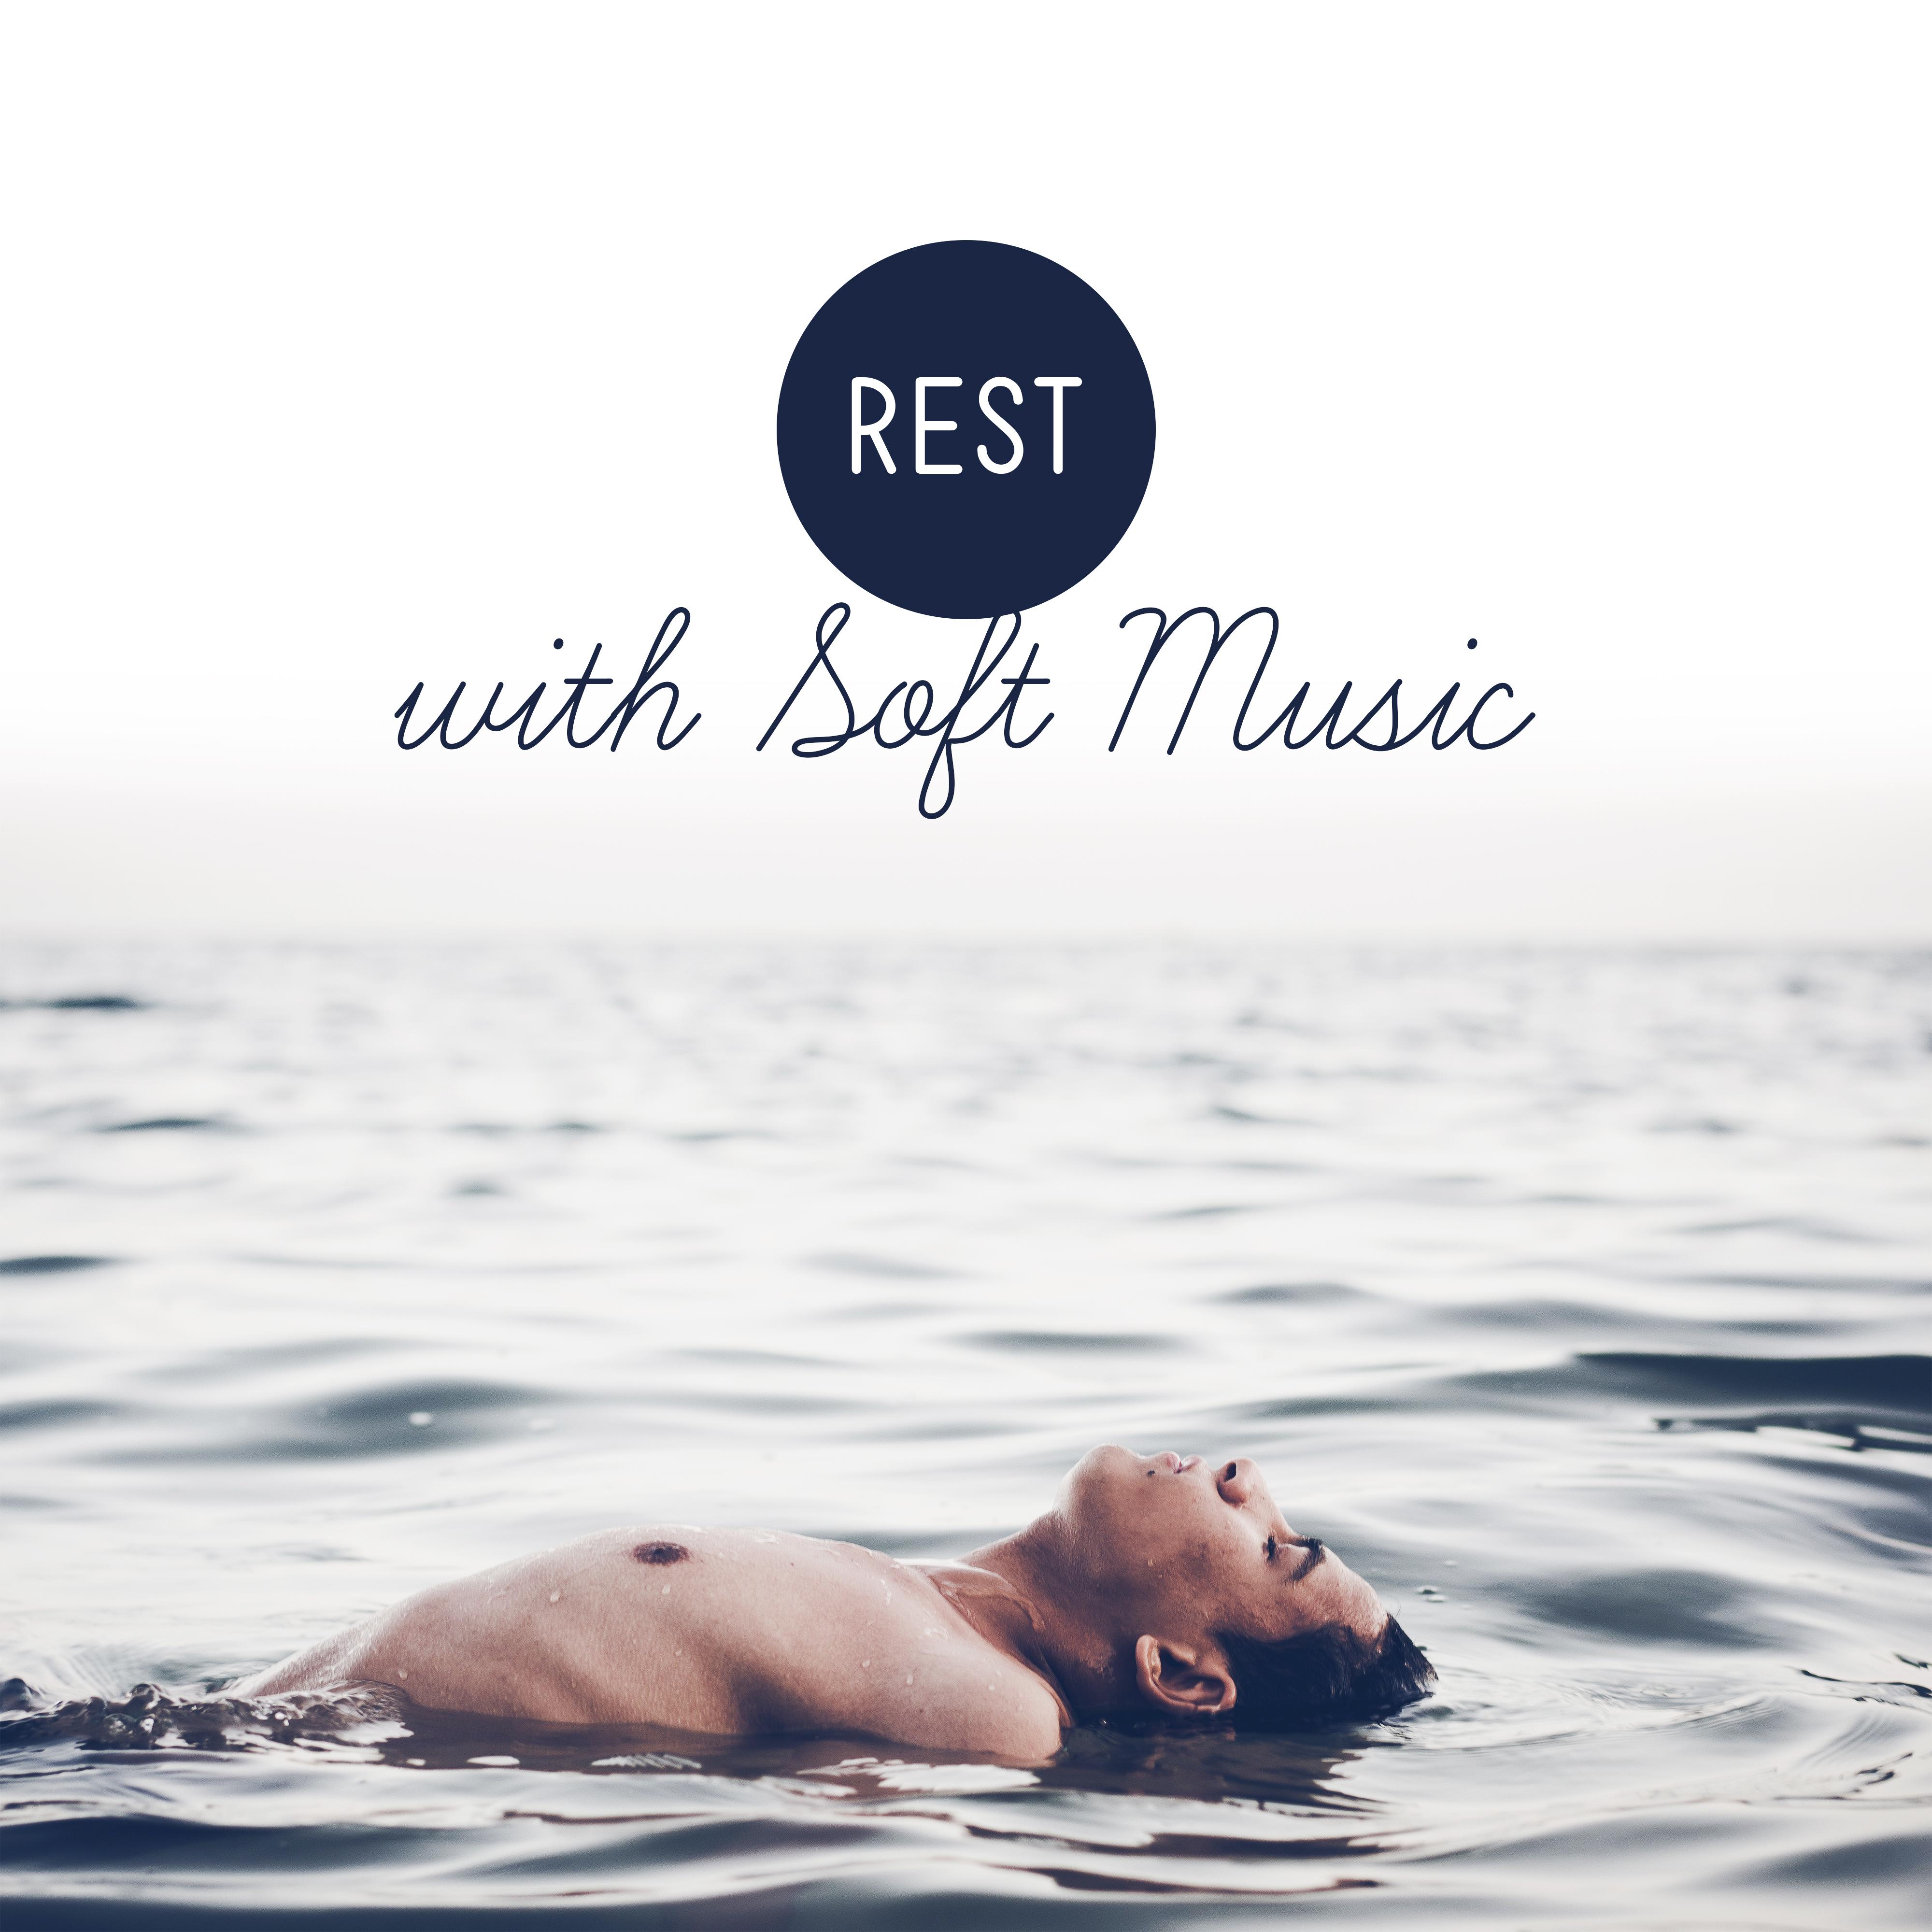 Rest with Soft Music